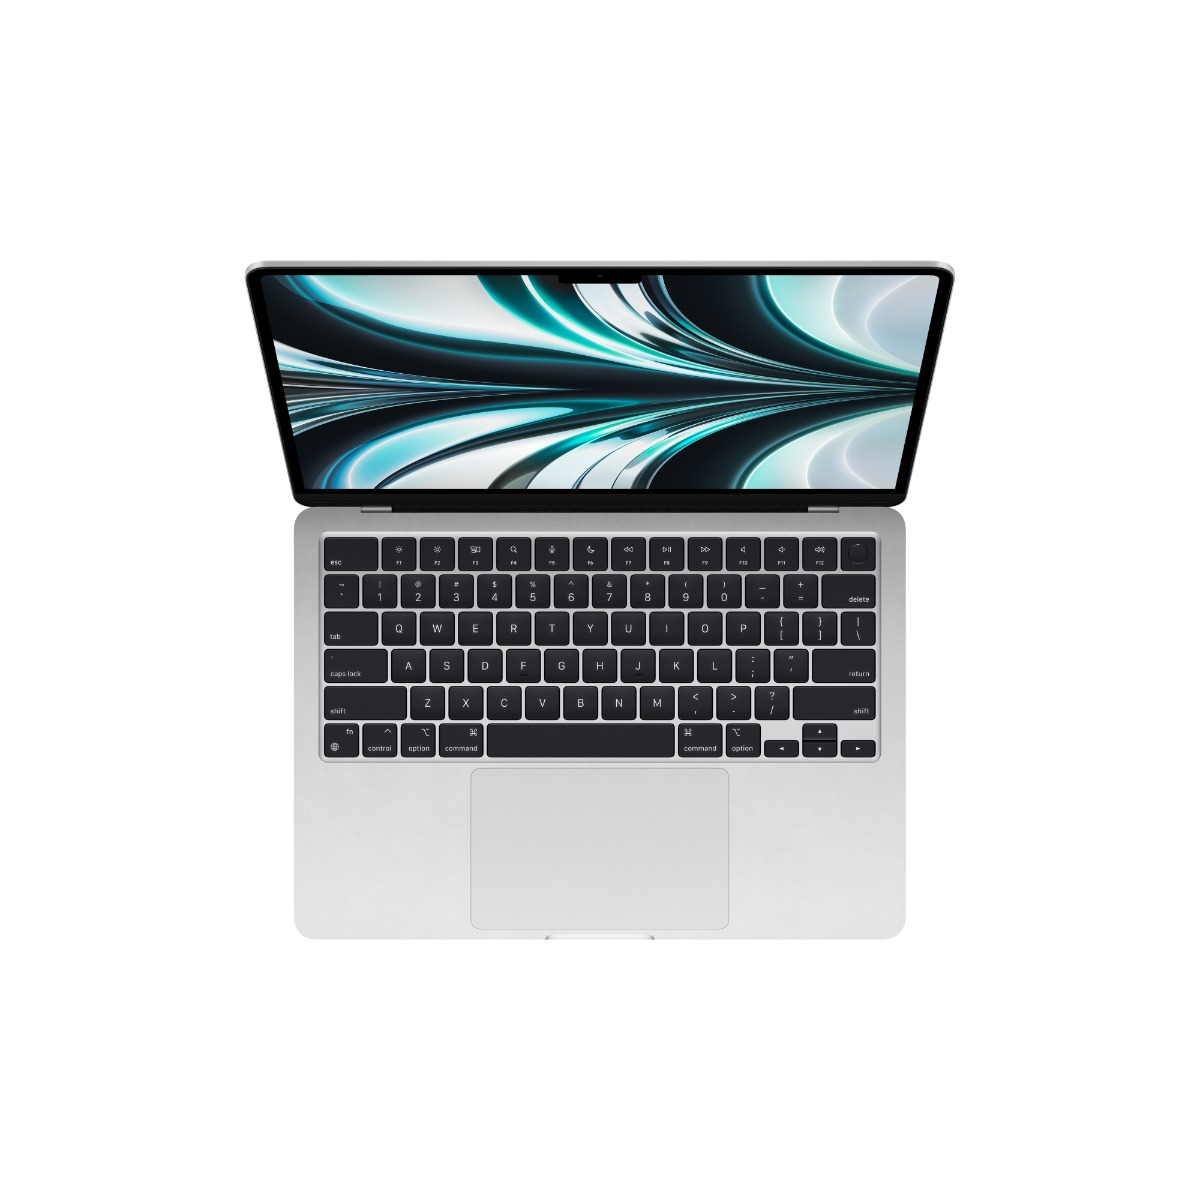 13-inch MacBook Air: Apple M2 chip with 8 core CPU, 8 core GPU, 16 core Neural Engine, 256GB, , large image number 5